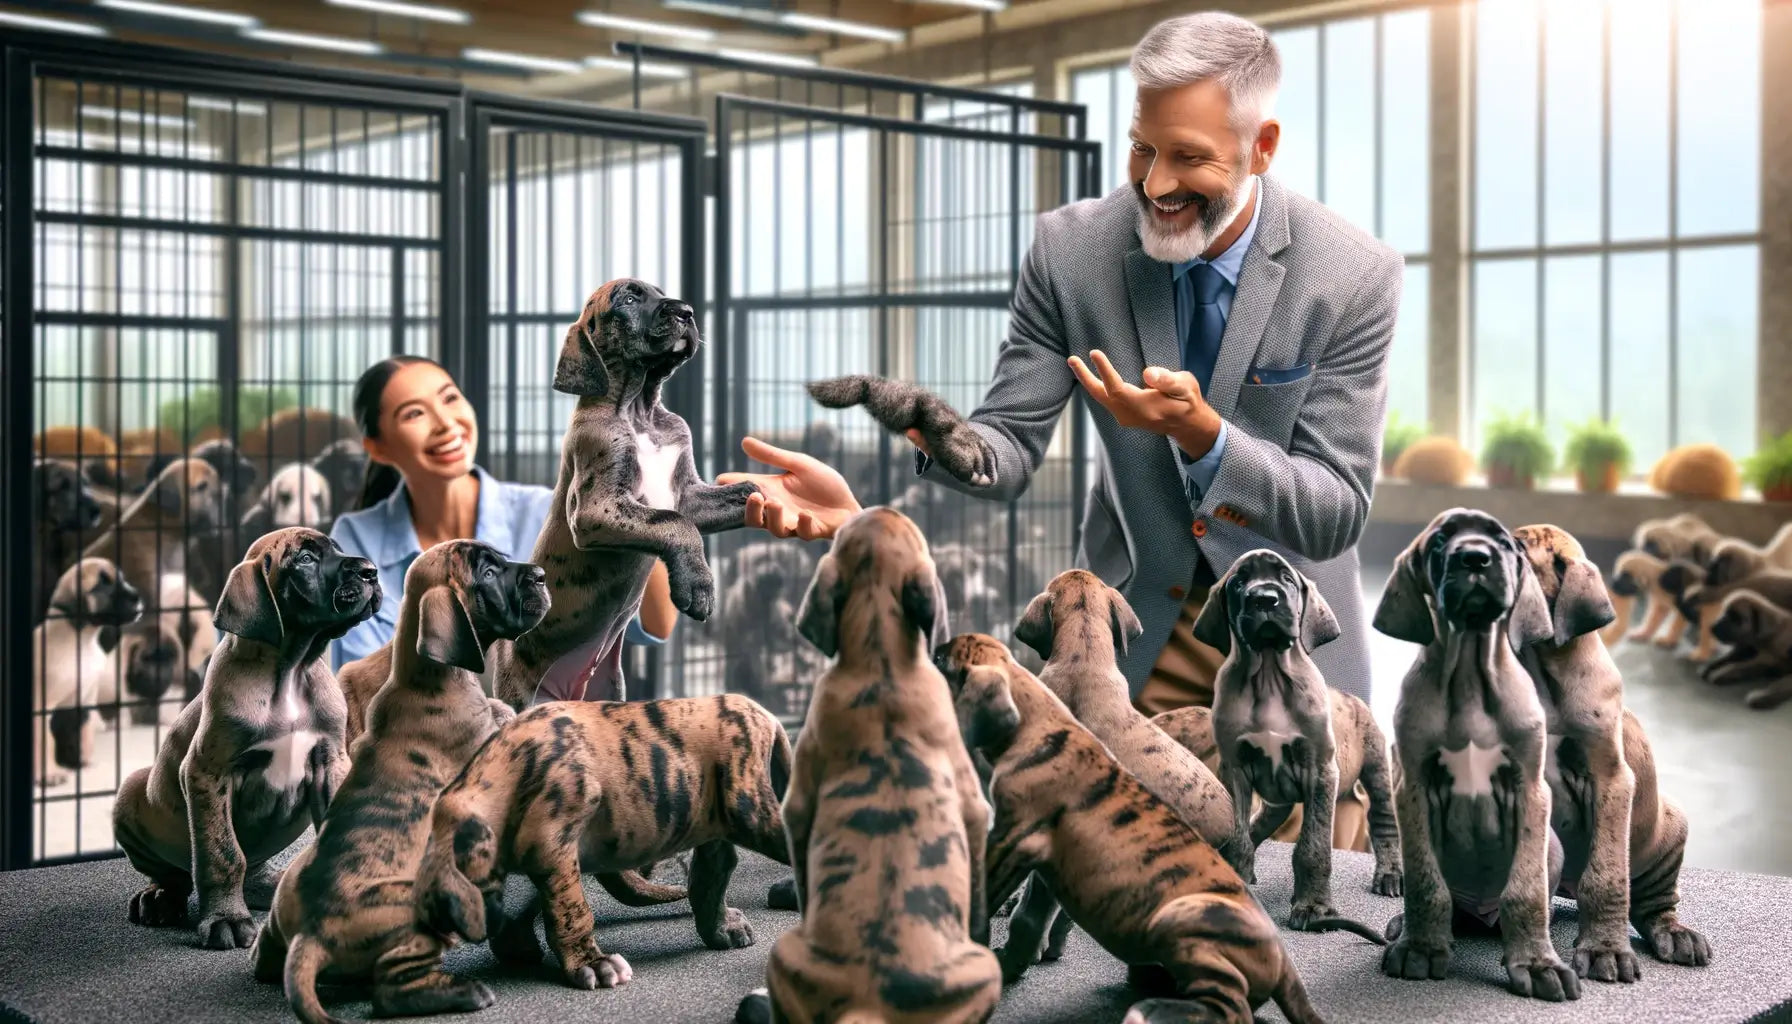 A breeder presenting a litter of Brindle Great Dane puppies to a potential owner in a breeding facility.